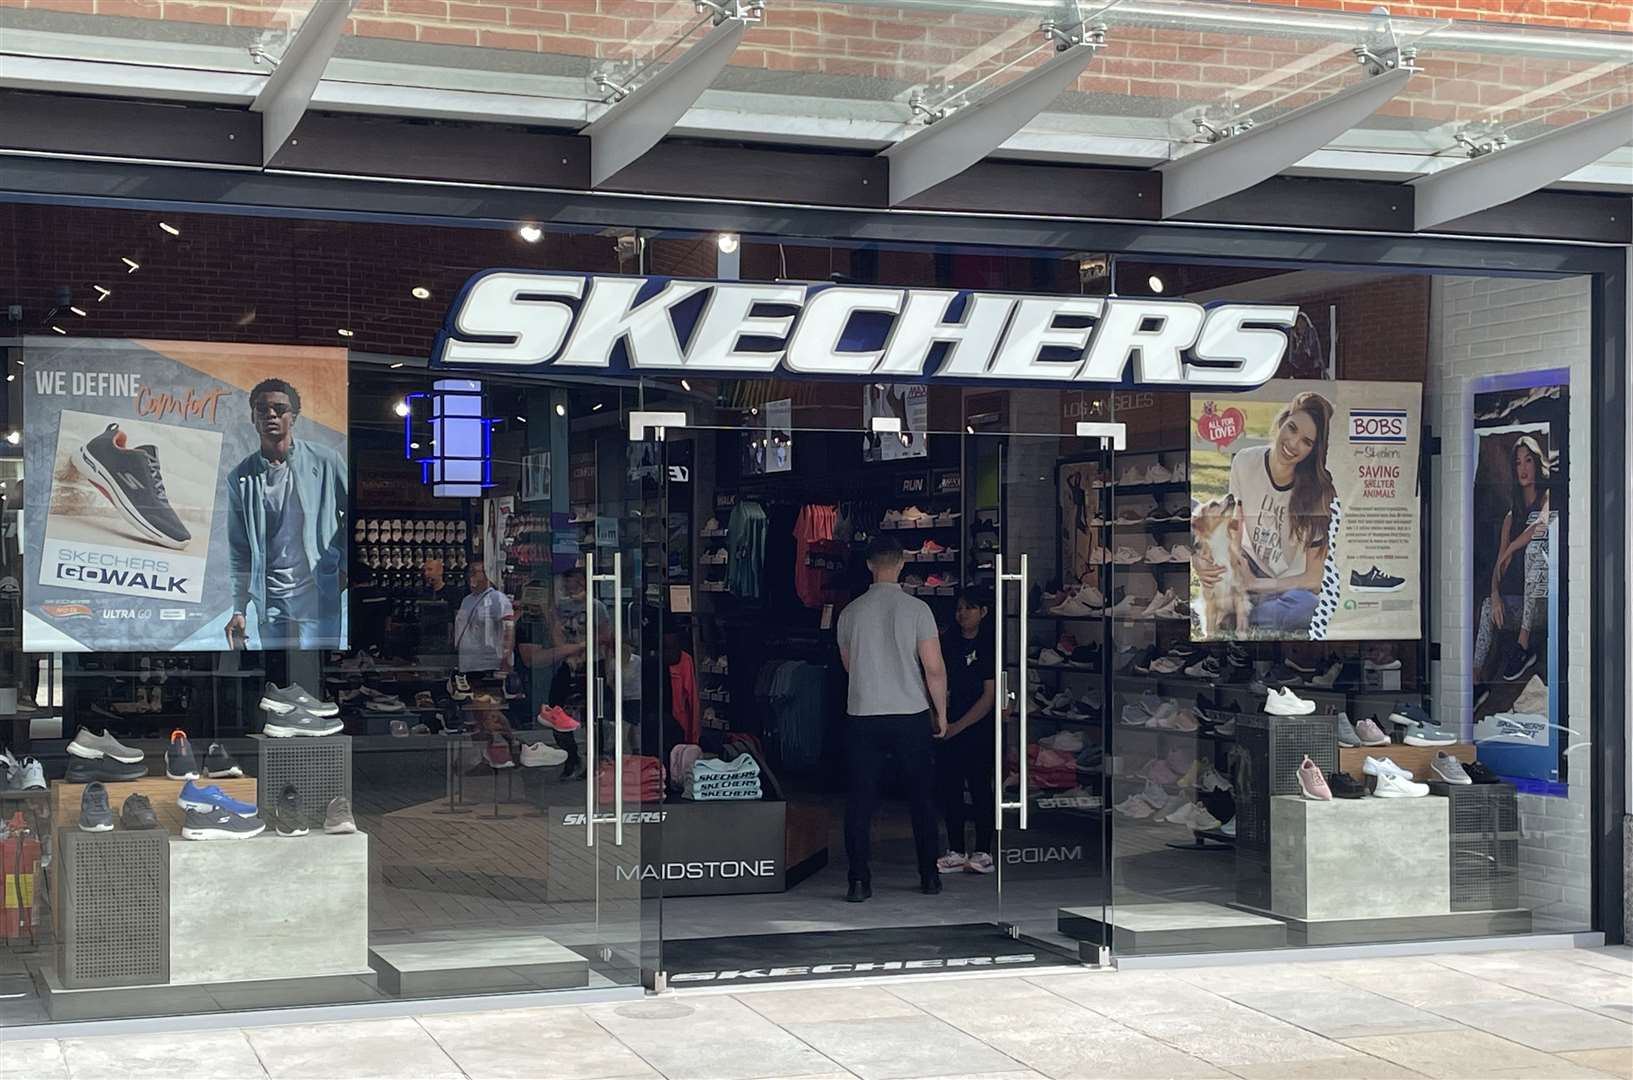 Skechers footwear store opens in Fremlin Maidstone alongside Bluewater, Ashford Designer Outlet and Canterbury